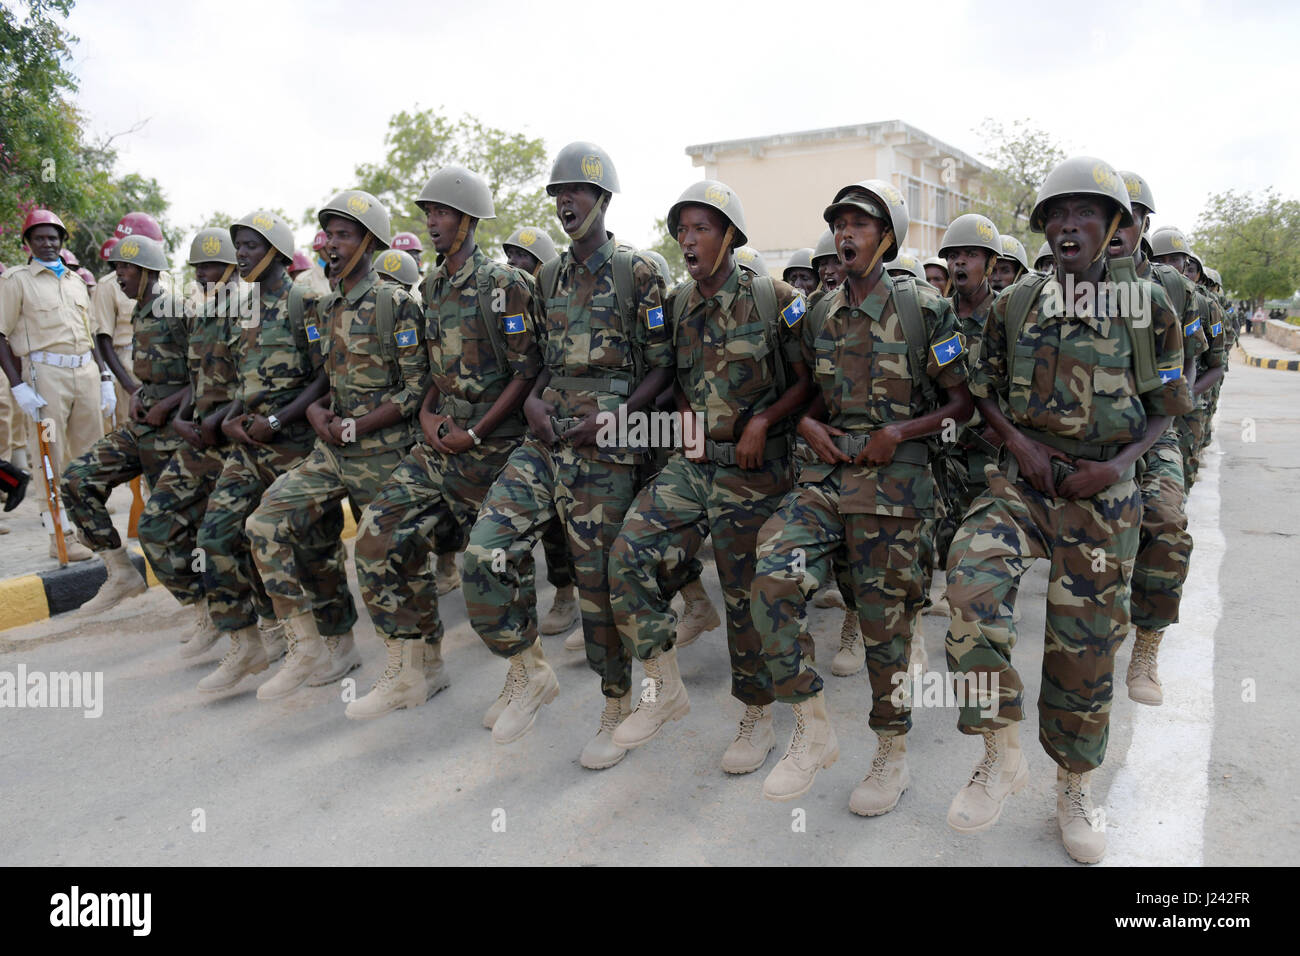 Soldiers in the Somali Defence forces parade during  a ceremony to mark the 57th Anniversary of the Somali National Army held April 12, 2017 in Mogadishu, Somalia. Stock Photo